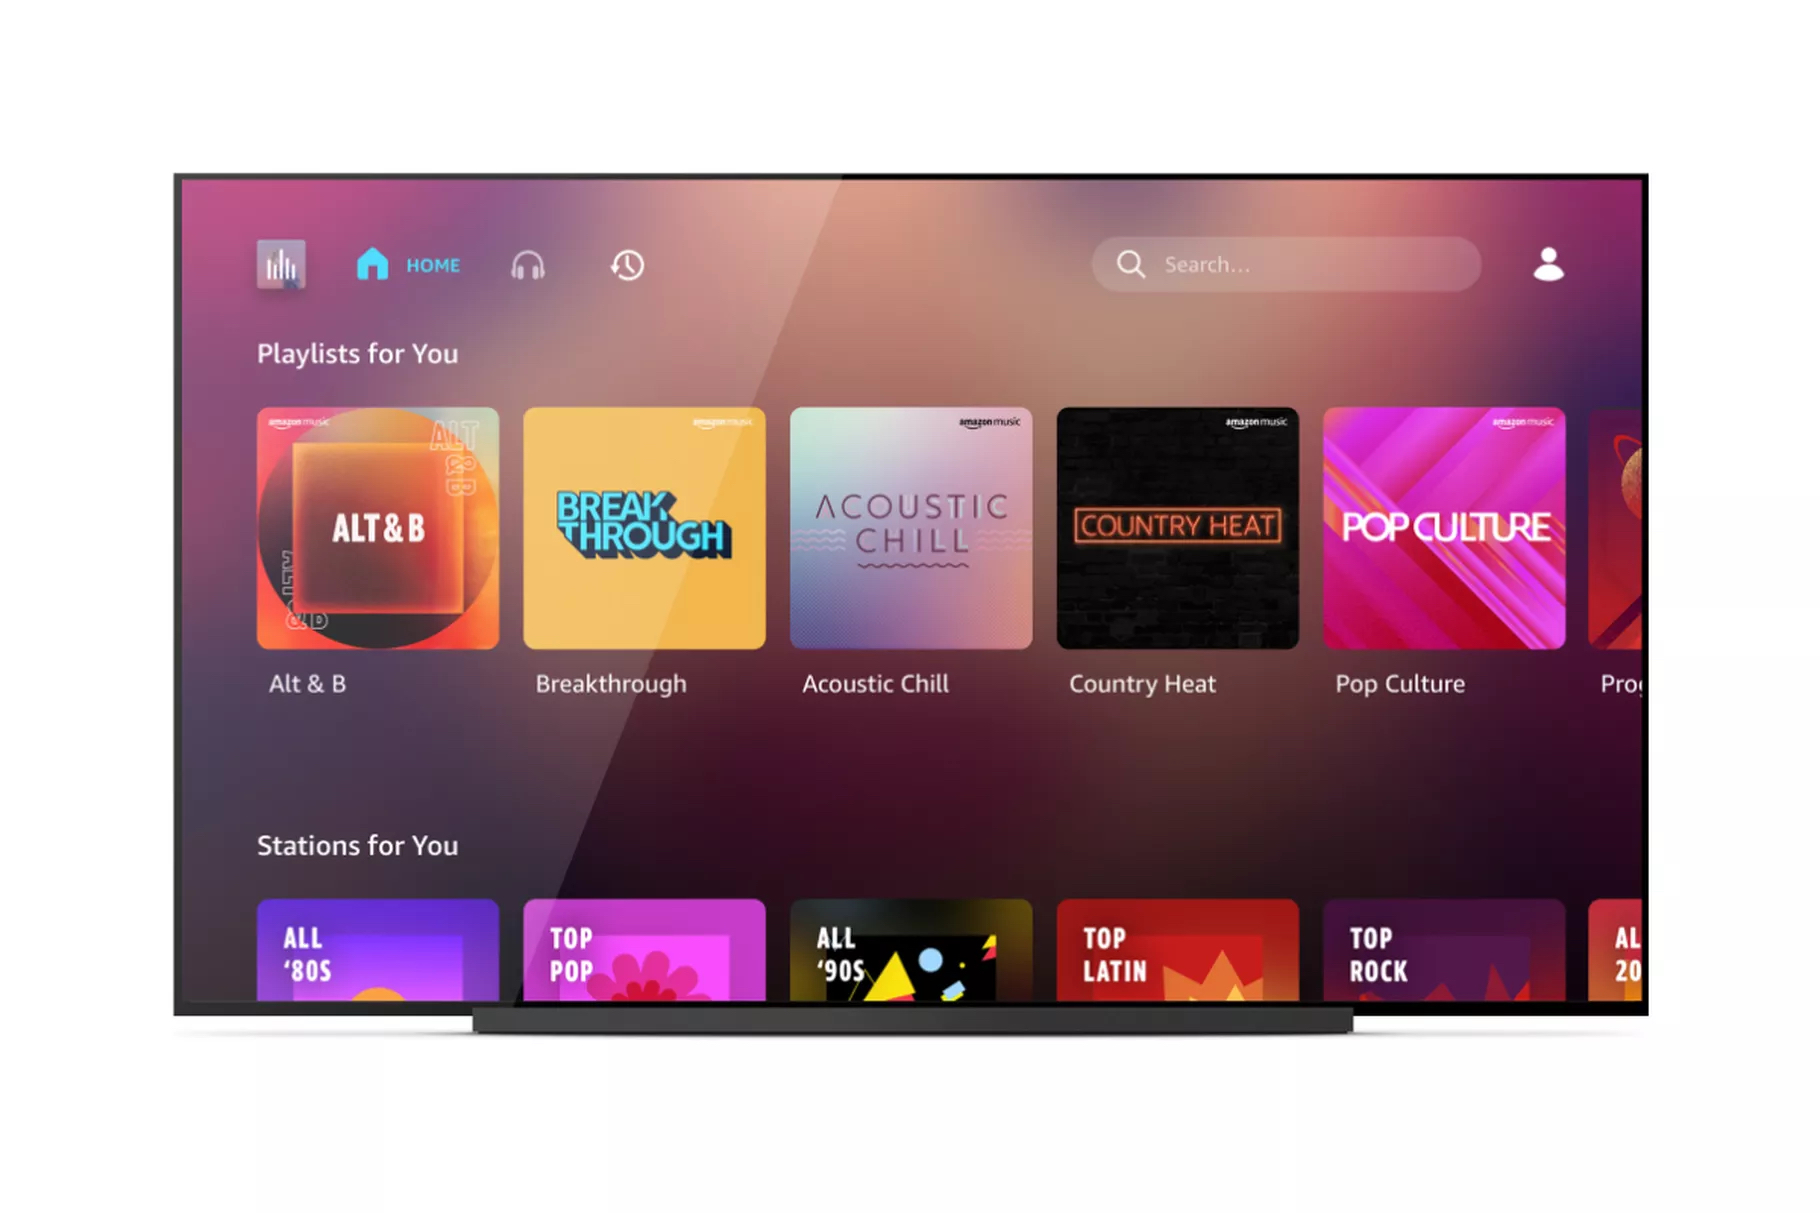 Stream 70m songs on Amazon Music through Google TV and Android TV with the new app